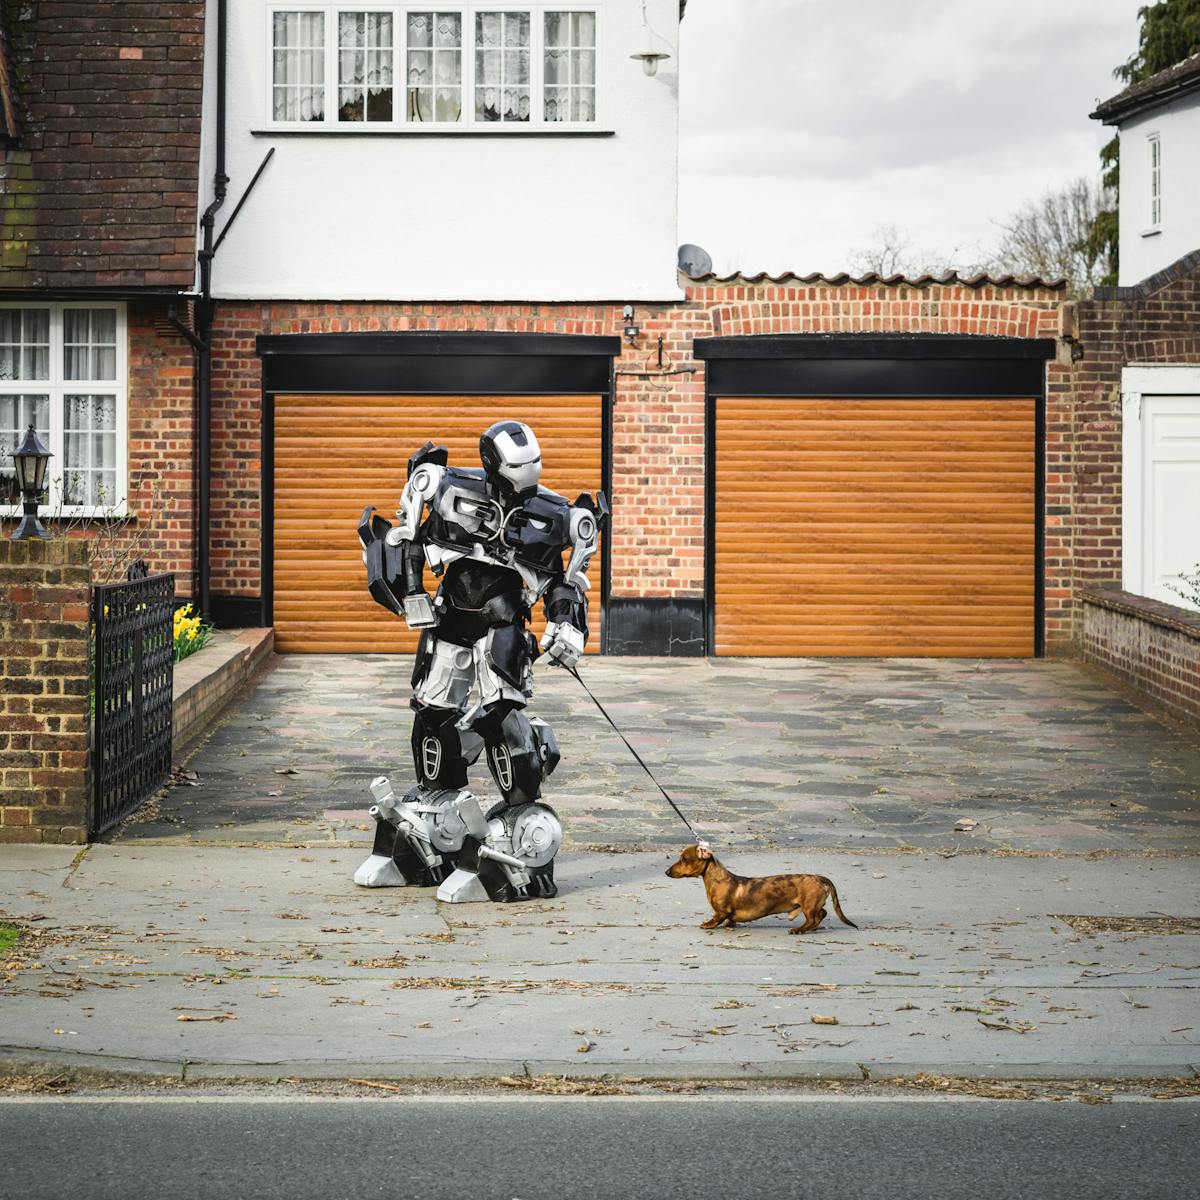 Photograph of a robot holding a small dog on a lead, standing on a typical suburban pavement in front of a house.